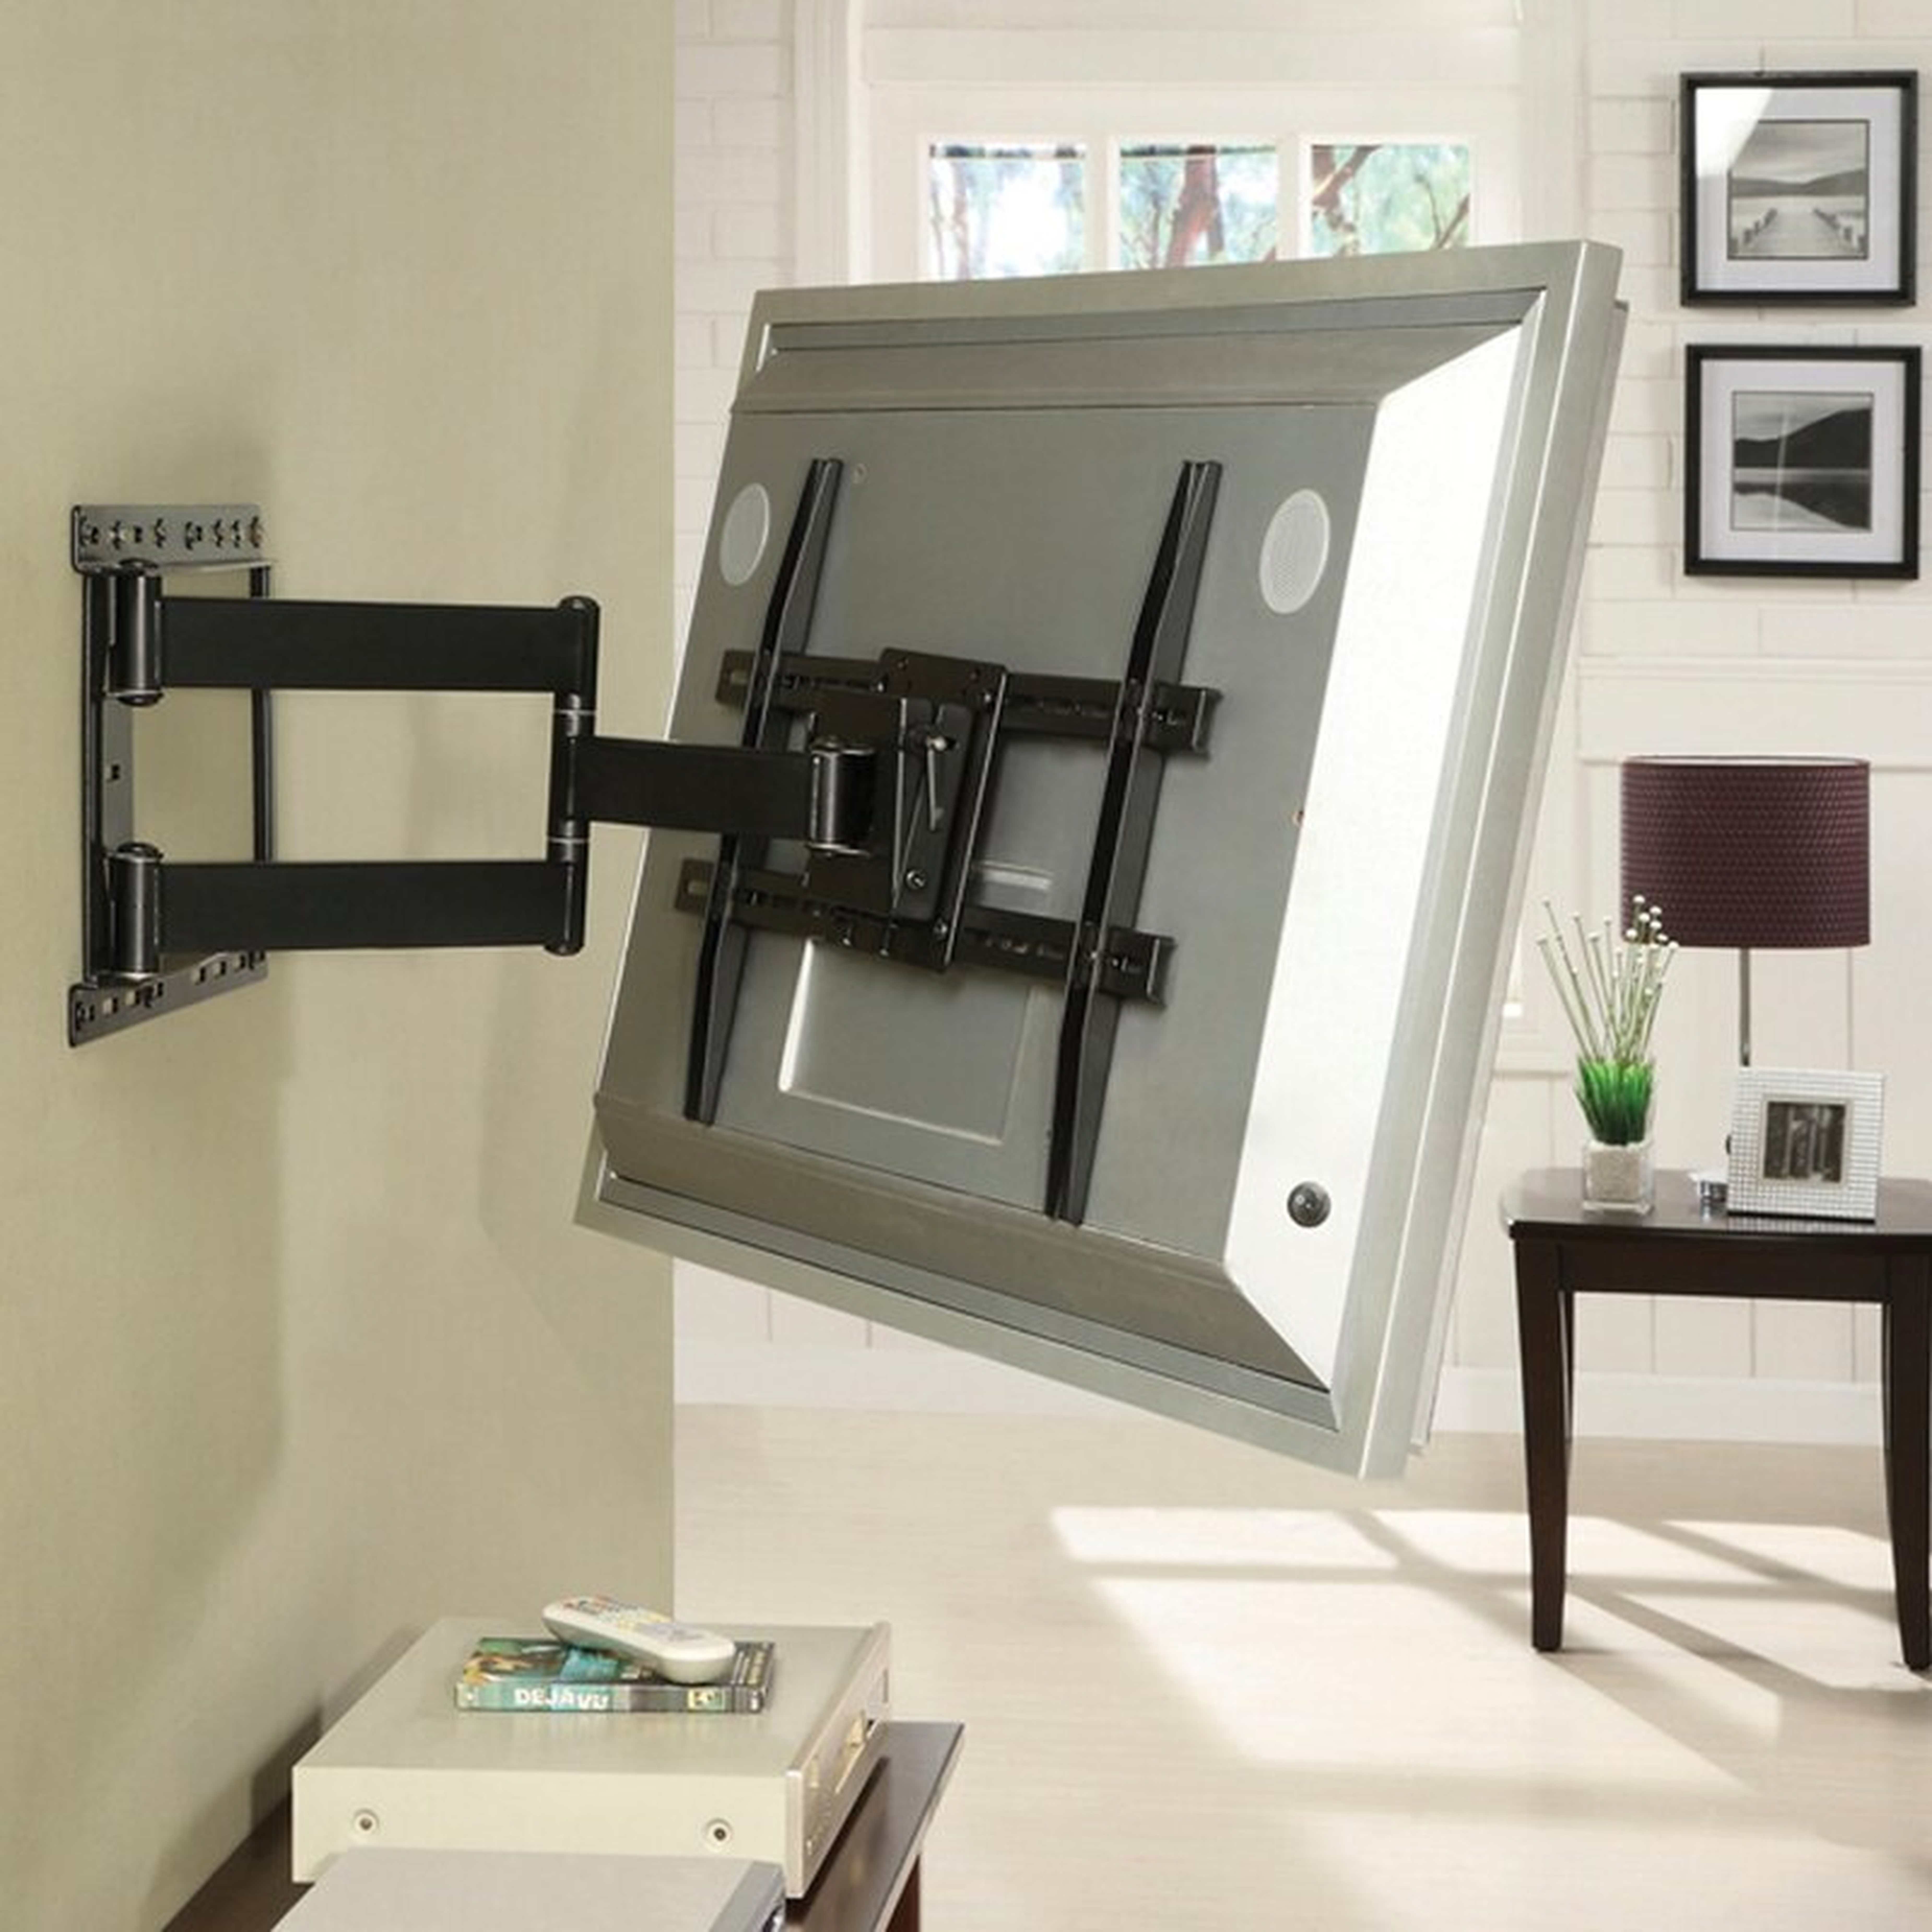 Large Full Motion Articulating ArmSwivelTilt Wall Mount for 19 - 80 Flat Panel Screens in Black - Wayfair